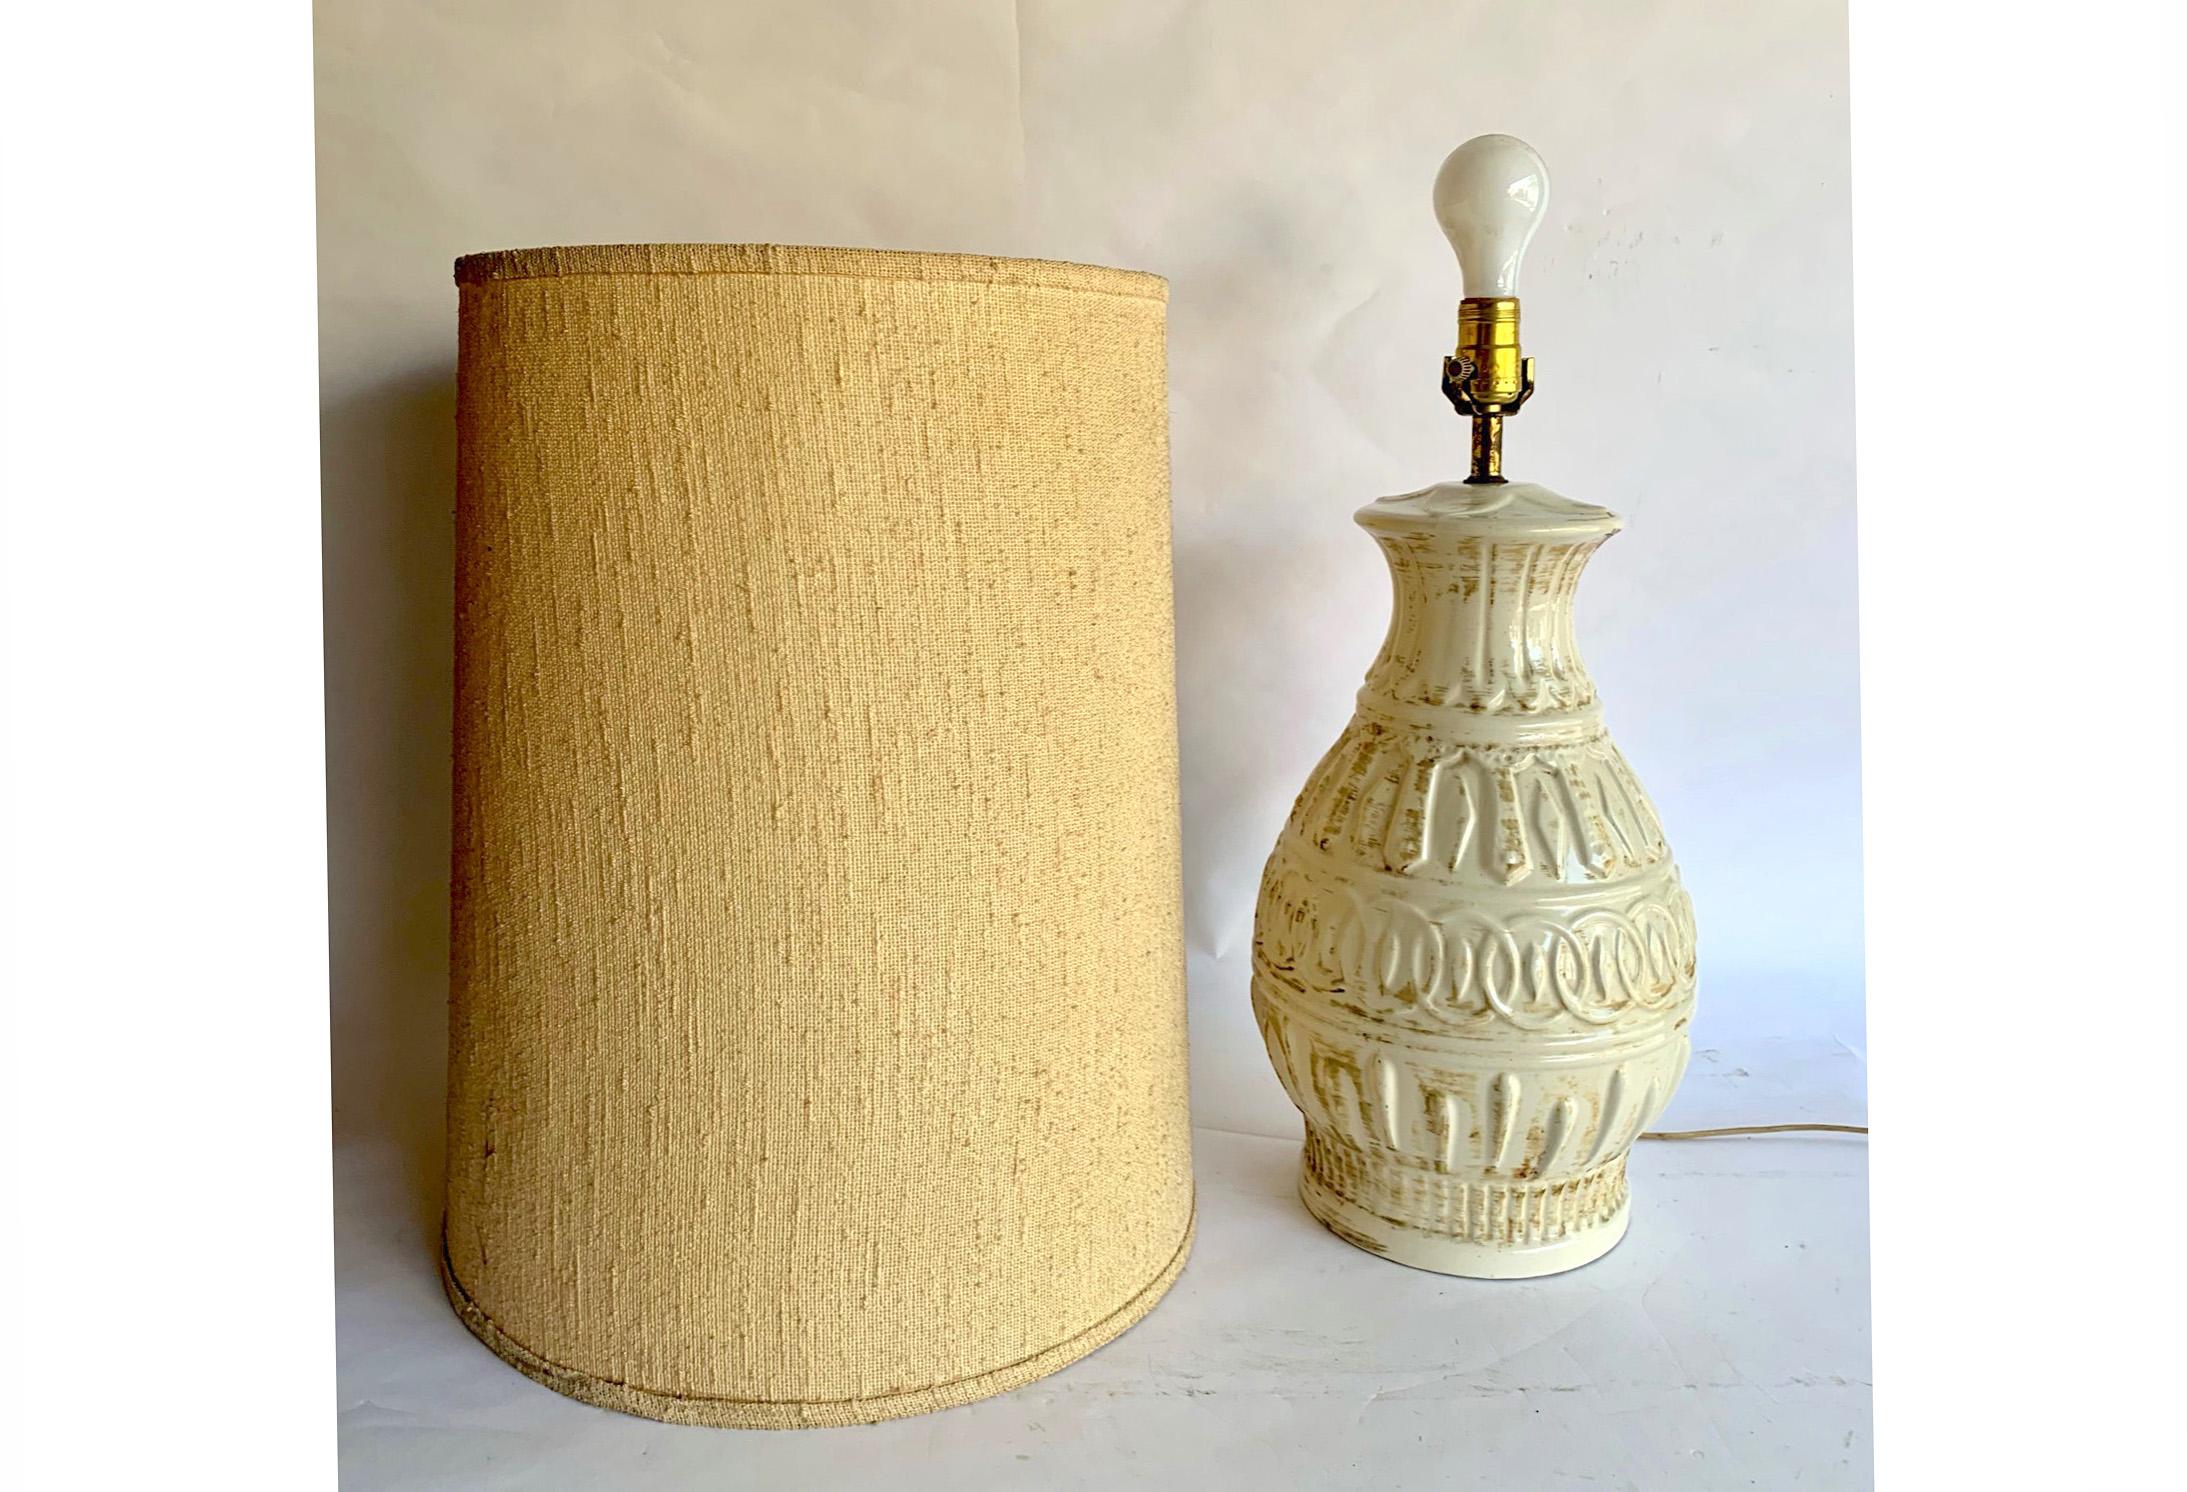 Striking table lamp made of cream colored ceramic with a brushed brown glaze. Pattern in relief includes chainlink circles and darts. Includes original tan, nubby shade.

Very good vintage condition. No cracks or damage to ceramic. Very clean. Shade